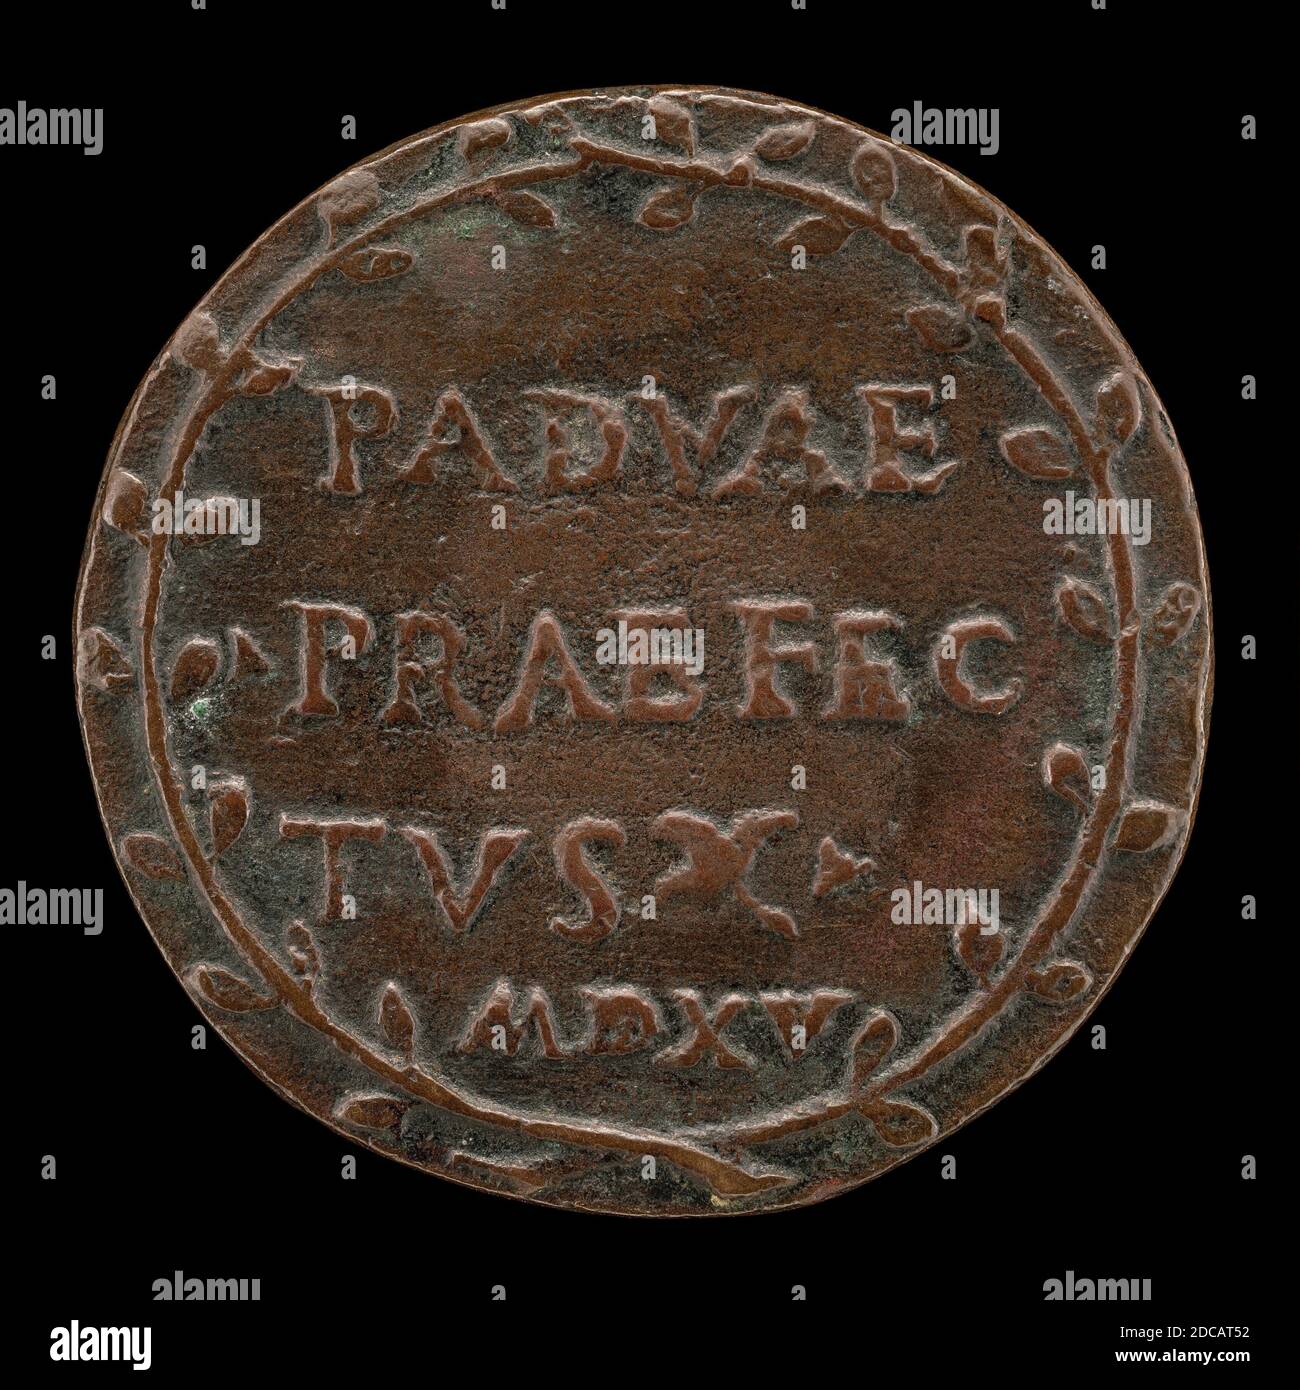 Paduan 16th Century, (artist), Inscription in a Wreath, c. 1515, bronze, overall (diameter): 3.2 cm (1 1/4 in.), gross weight: 16.15 gr (0.036 lb.), axis: 12:00 Stock Photo